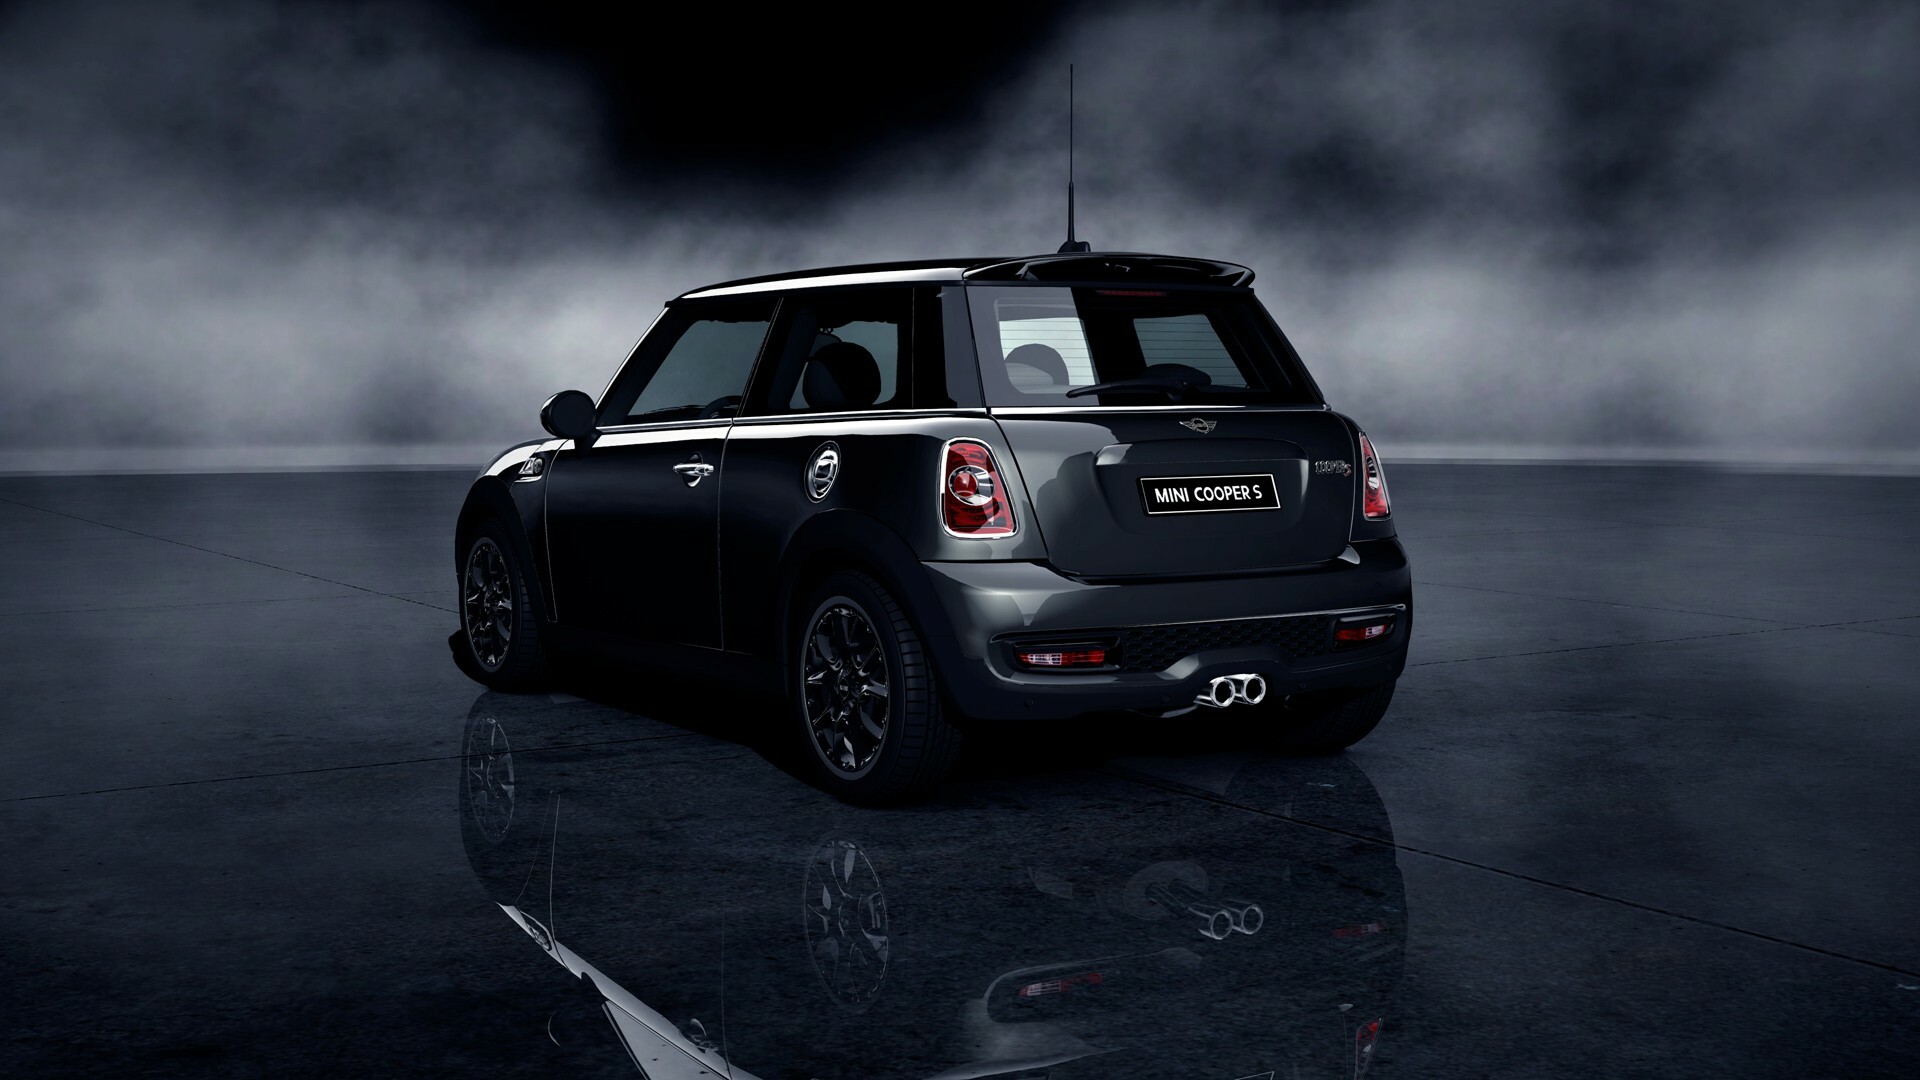 MINI Cooper: Model S, Gran Turismo 5, Became a marque in its own right in 1969. 1920x1080 Full HD Background.